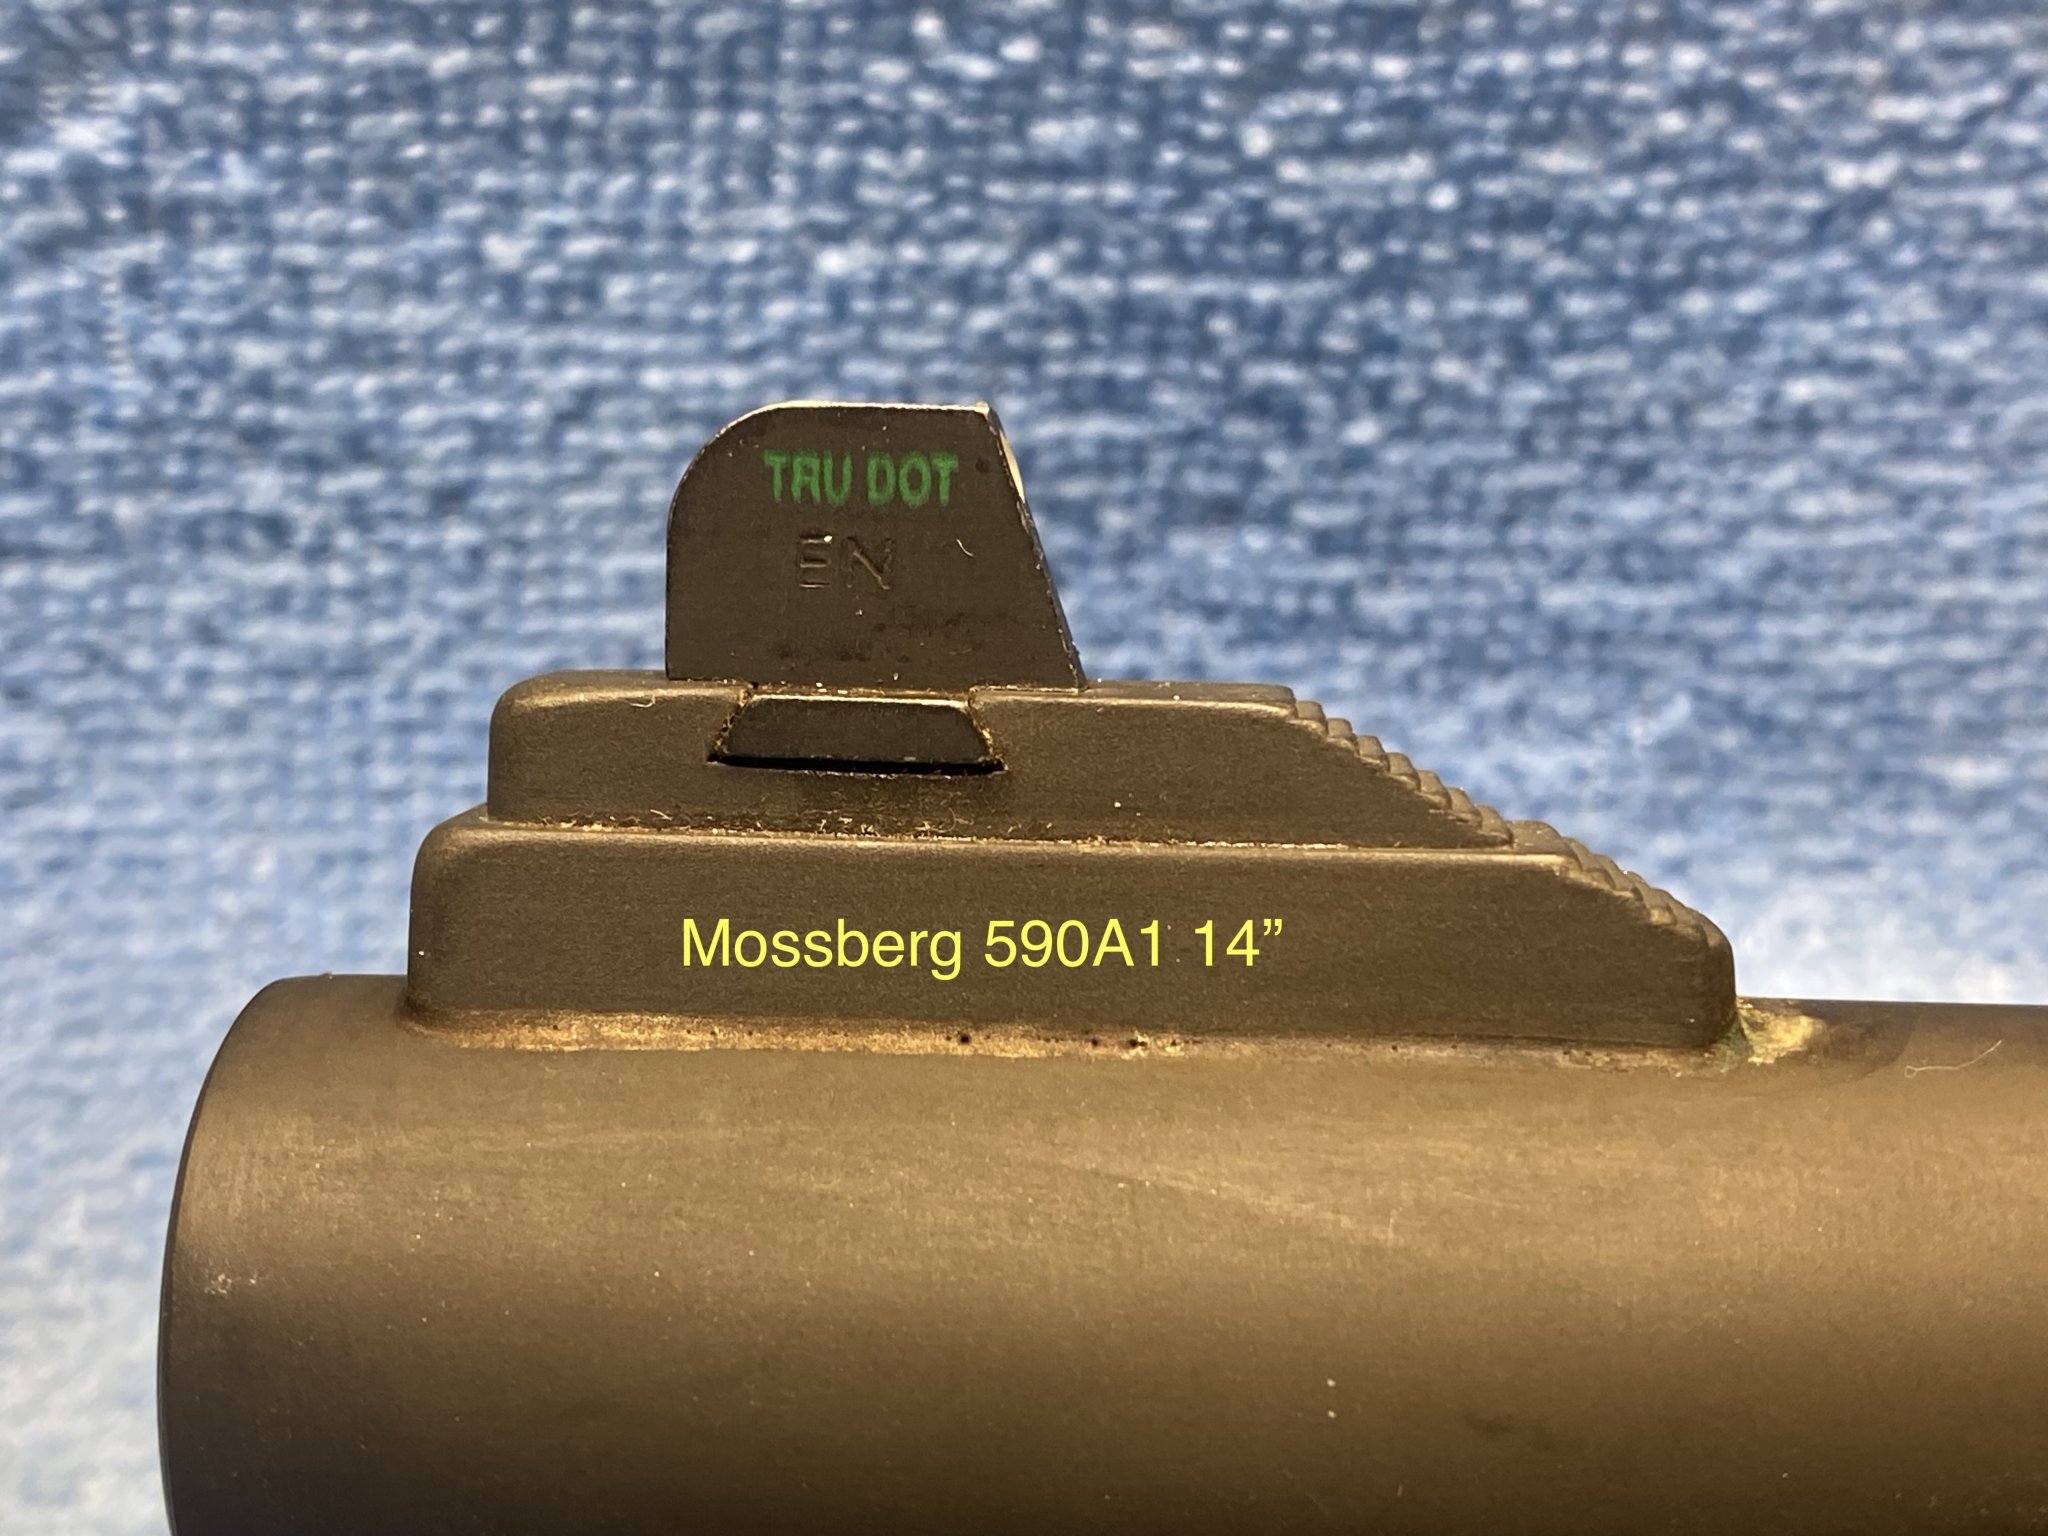 IMG_9868Mossberg 590A1 14%22 Tritium Front Sight Dimensions 01.31.24.jpg